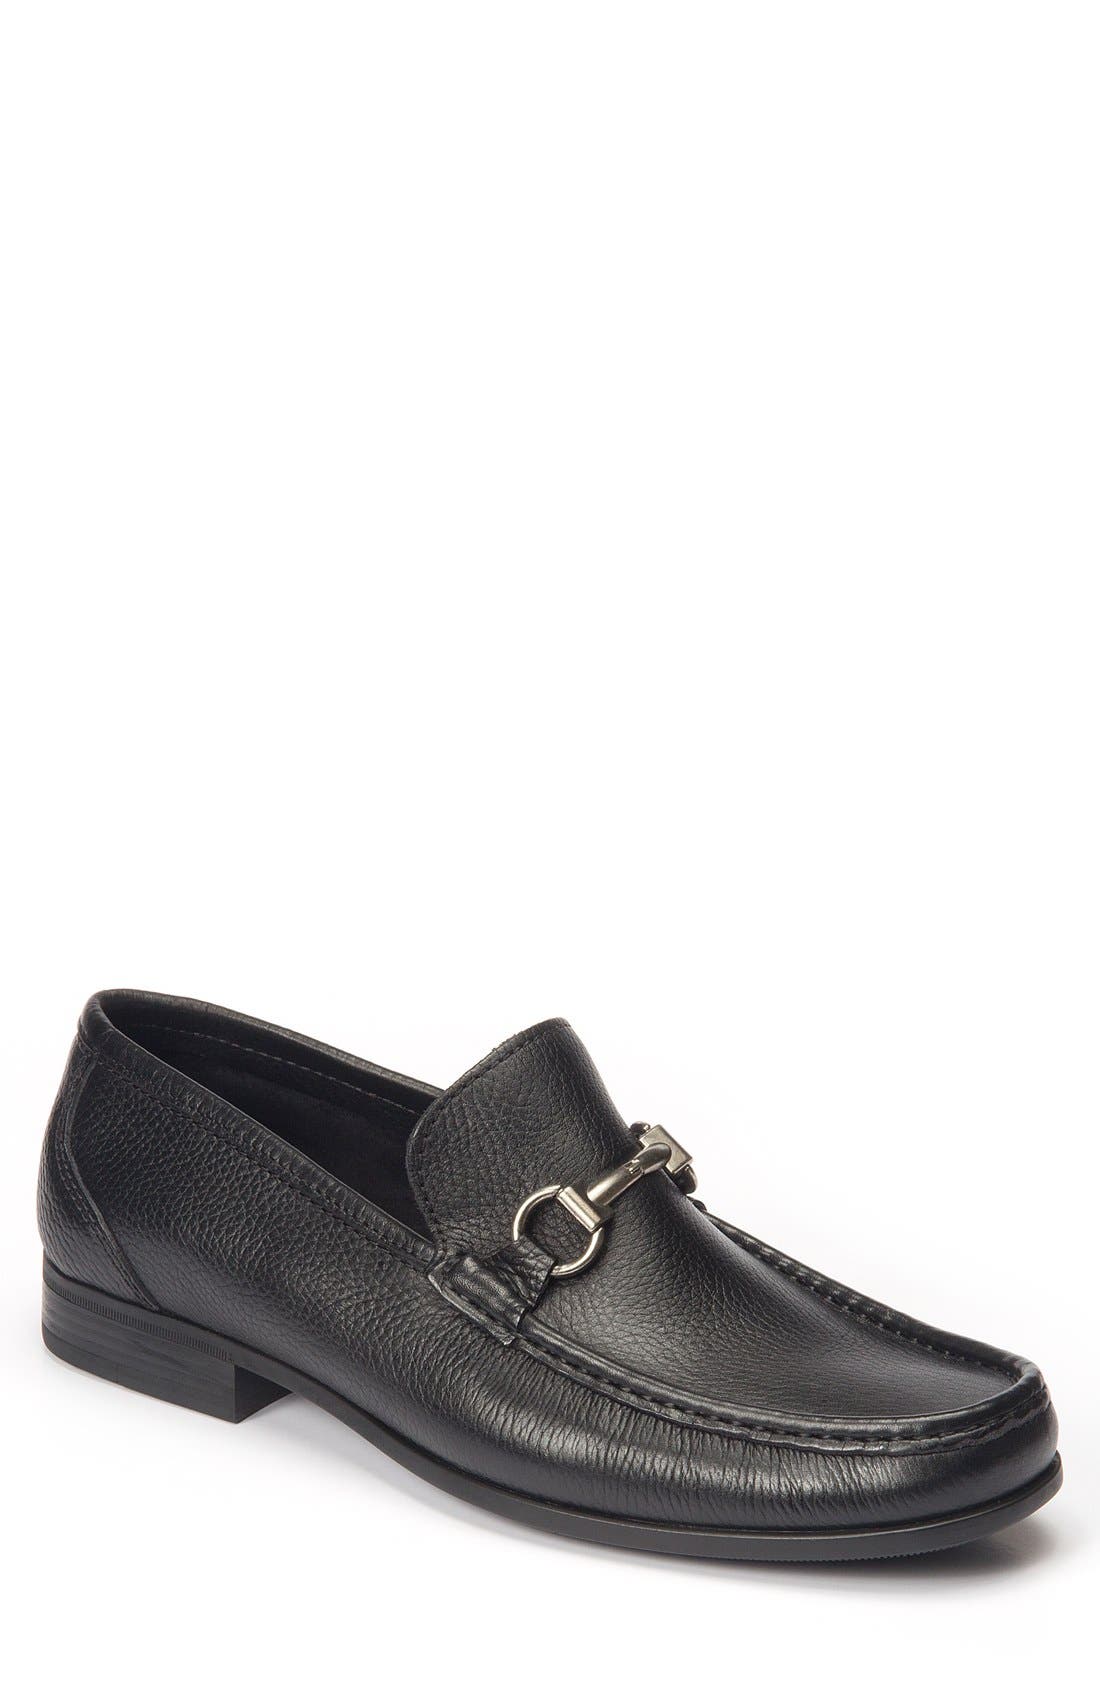 Men's Sandro Moscoloni Shoes Nordstrom